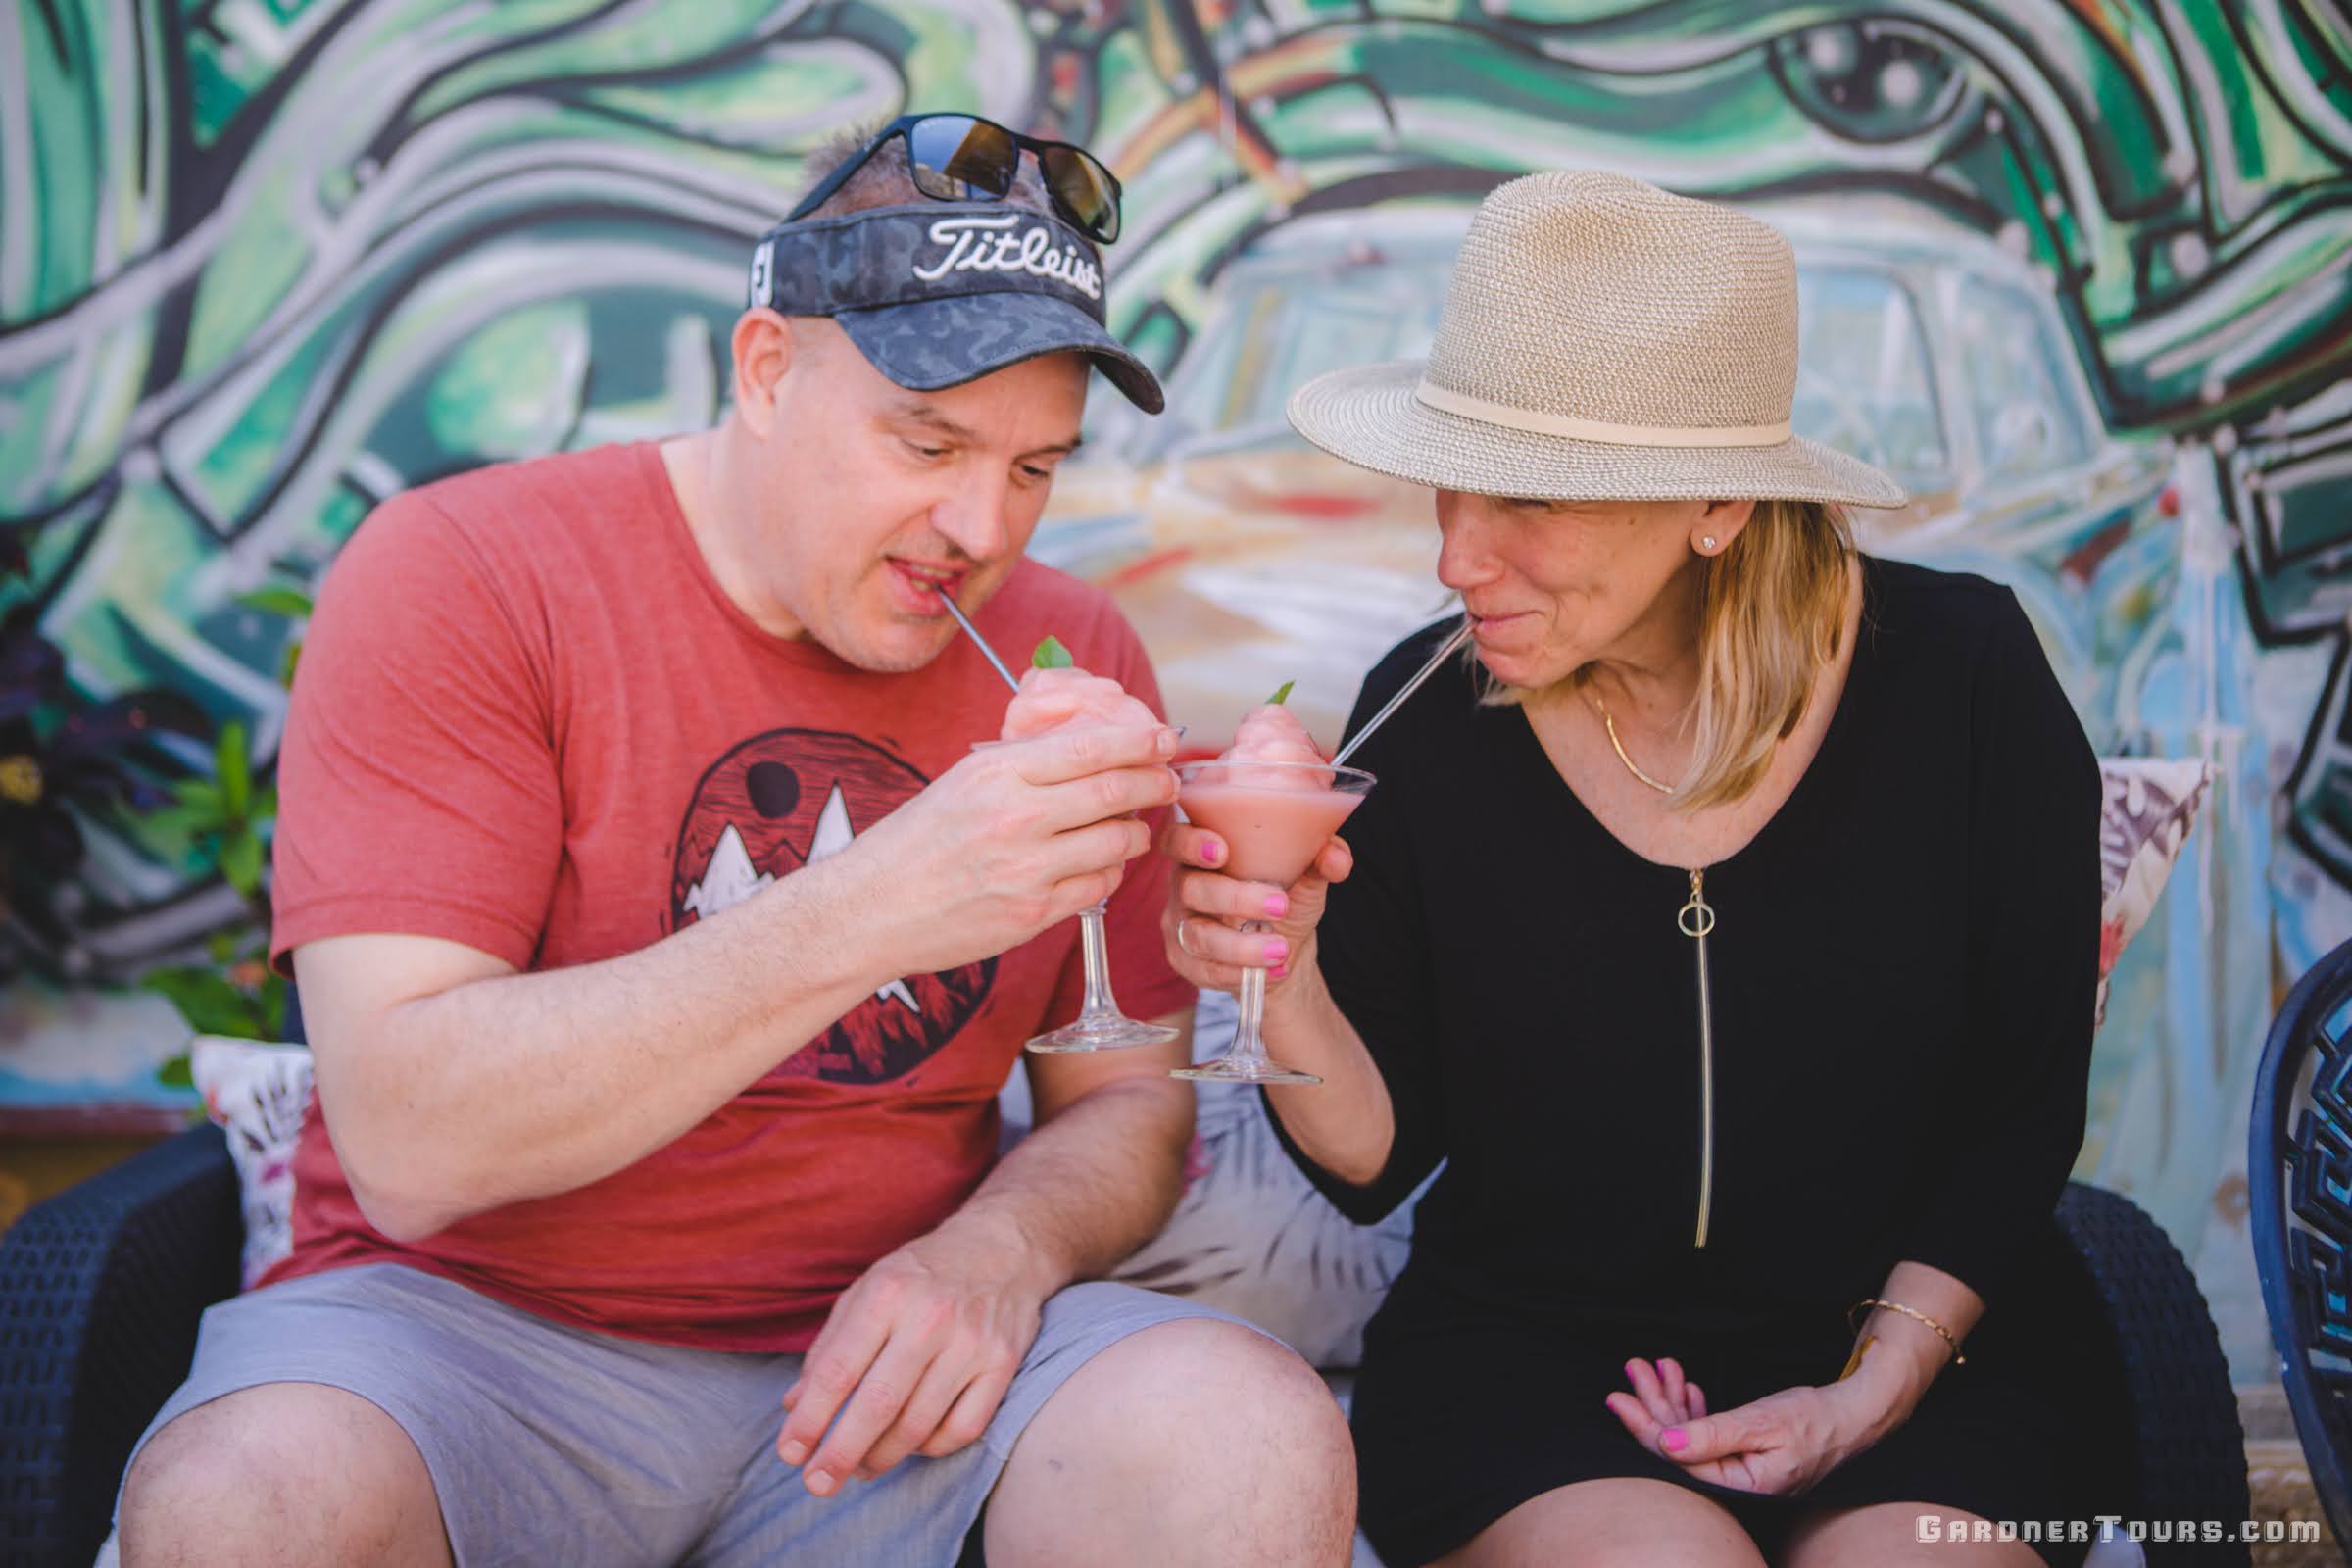 A Man and a Woman couple enjoying homemade strawberry frozen daiquiris on a Rooftop after a Cuban Cocktail Lesson in Old Havana, Cuba